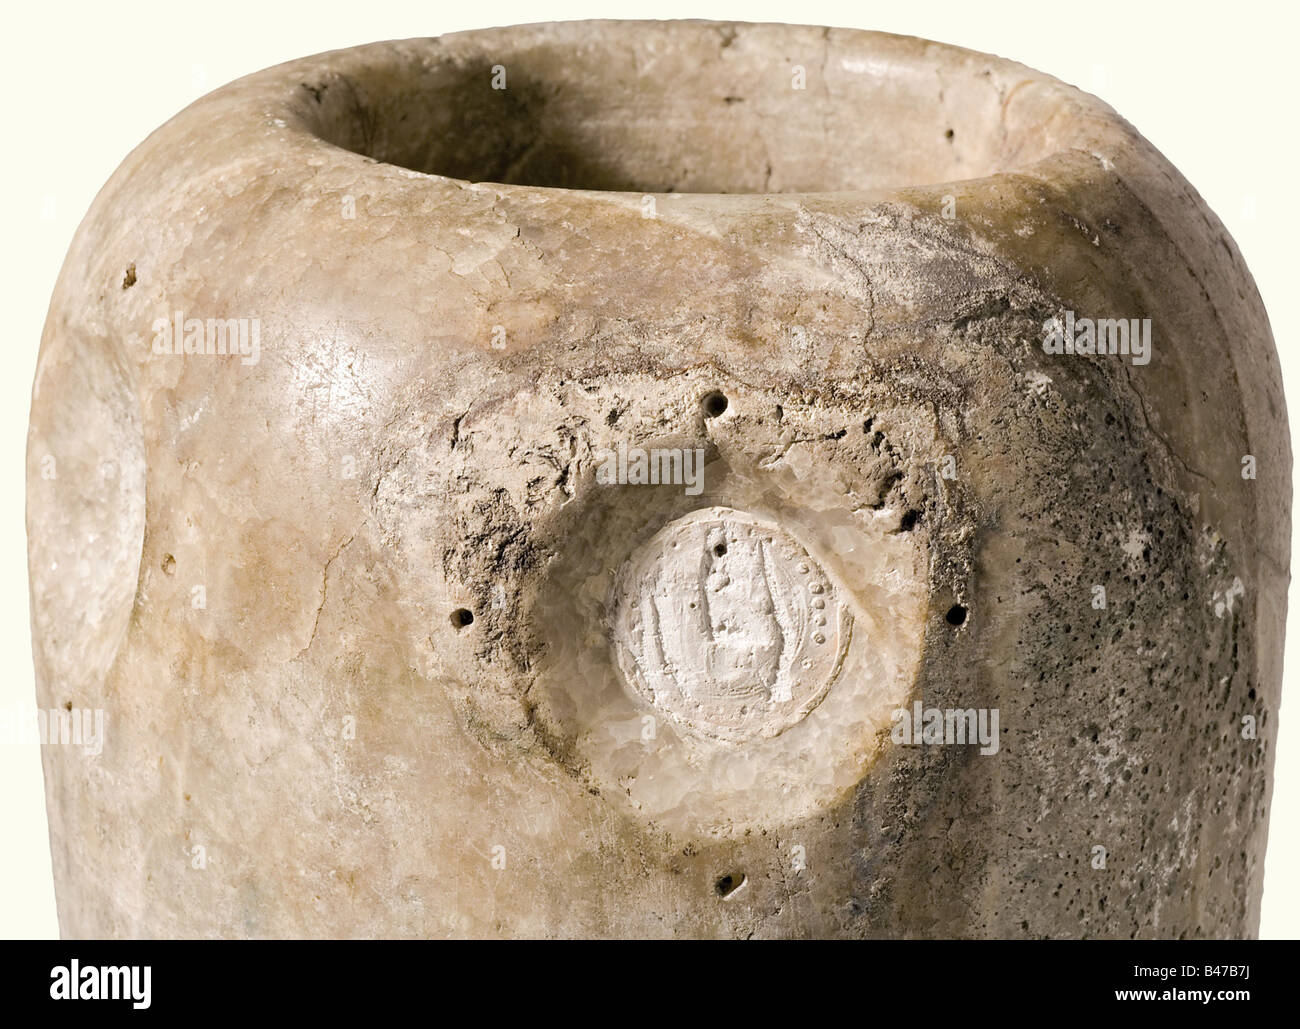 An alabaster canopic jar, Egypt, Middle Kingdom 2040 - 1782 B.C. The light grey alabaster body of the jar is slightly conical. There are three round depressions on the obverse side, and remnants of a gypsum(?) seal on the upper right. Small break on the lower rim. Height 37 cm. historic, historical, ancient world, ancient world, ancient times, object, objects, stills, clipping, cut out, cut-out, cut-outs, vessel, vessels, Stock Photo